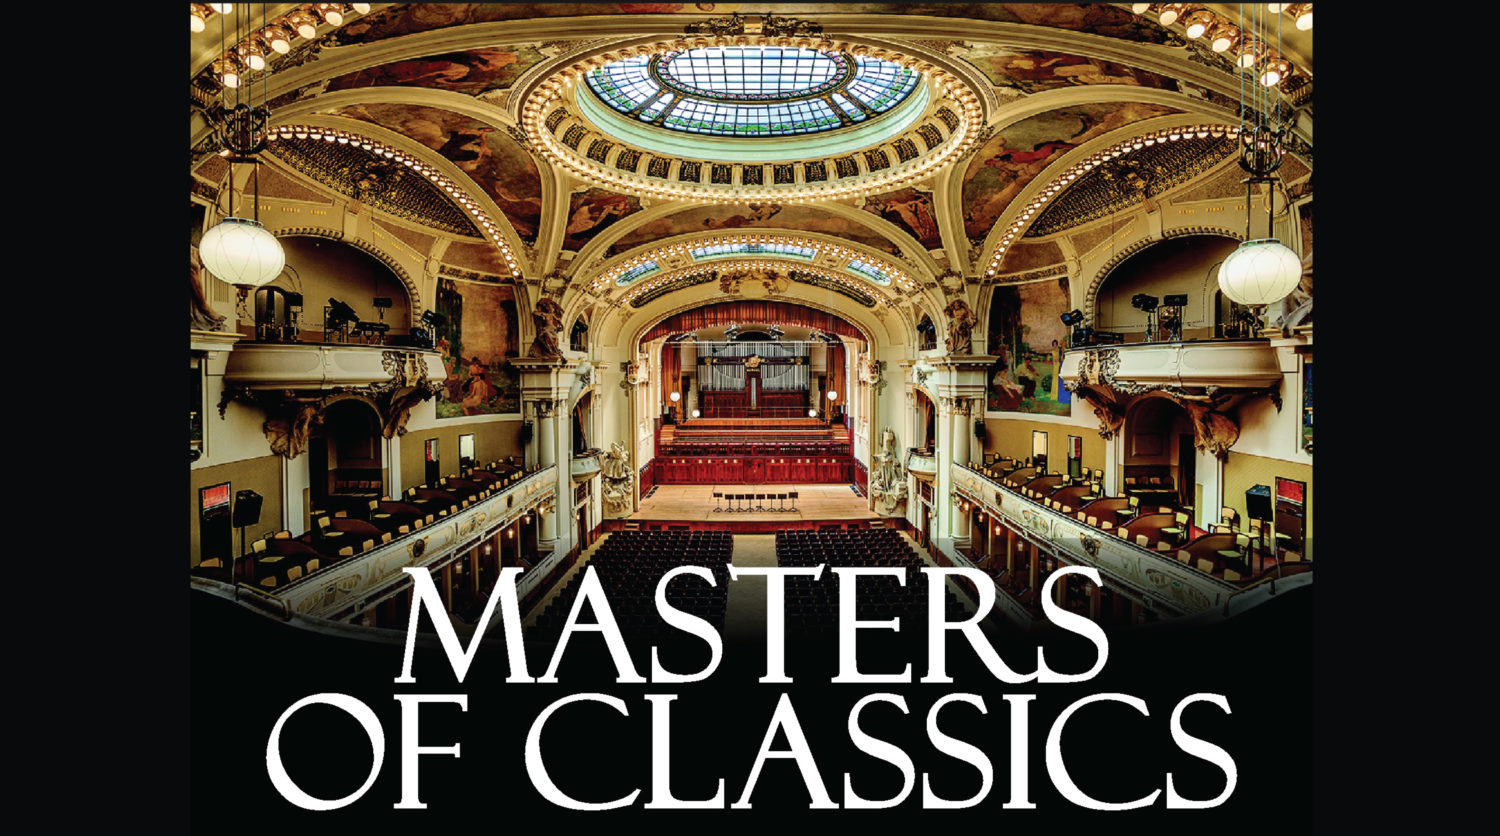 MASTERS OF CLASSICS IN THE MUNICIPAL HOUSE 02.07.2019